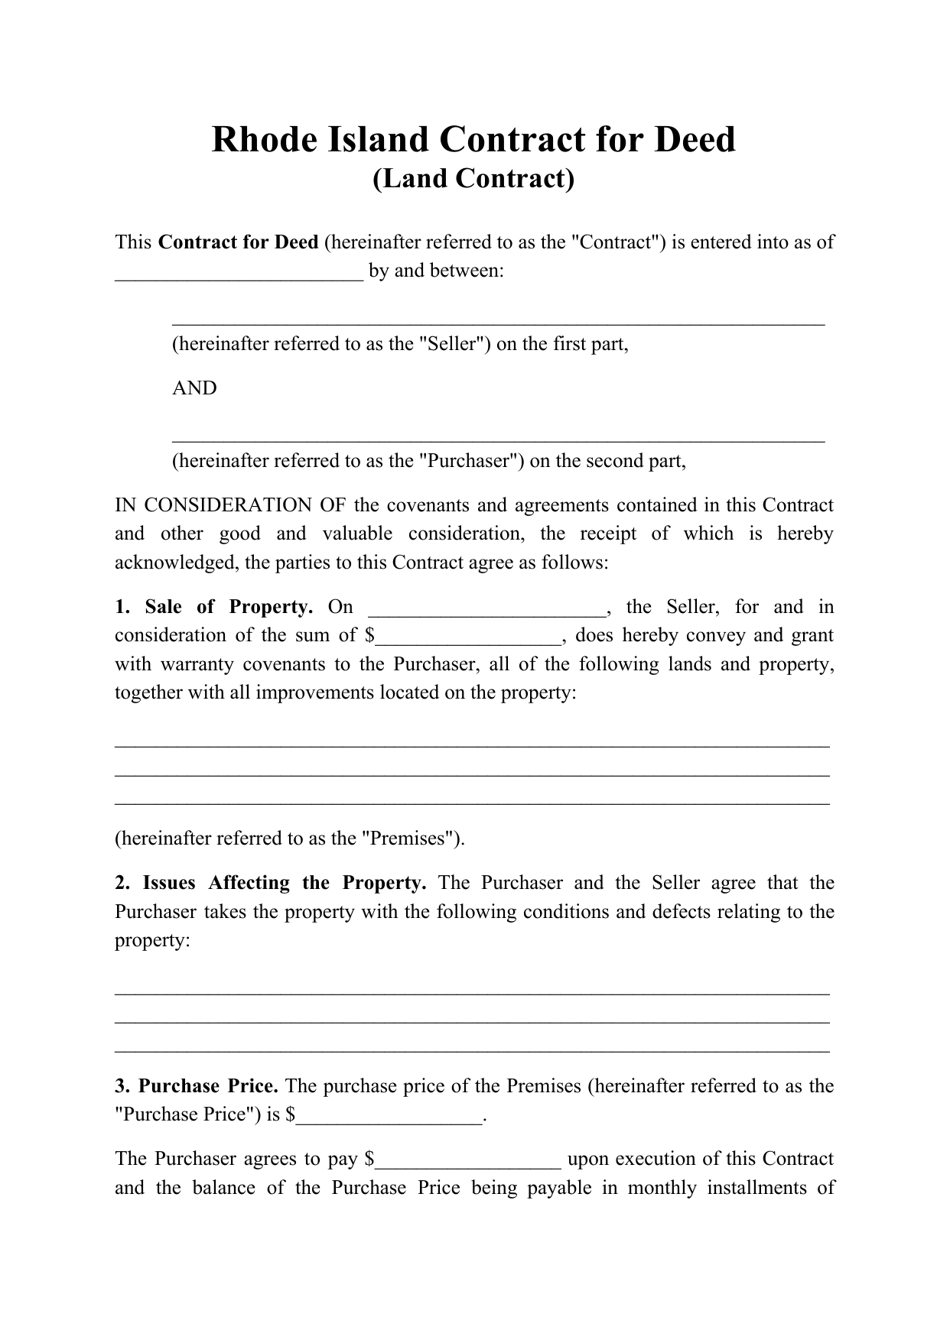 Contract for Deed (Land Contract) - Rhode Island, Page 1